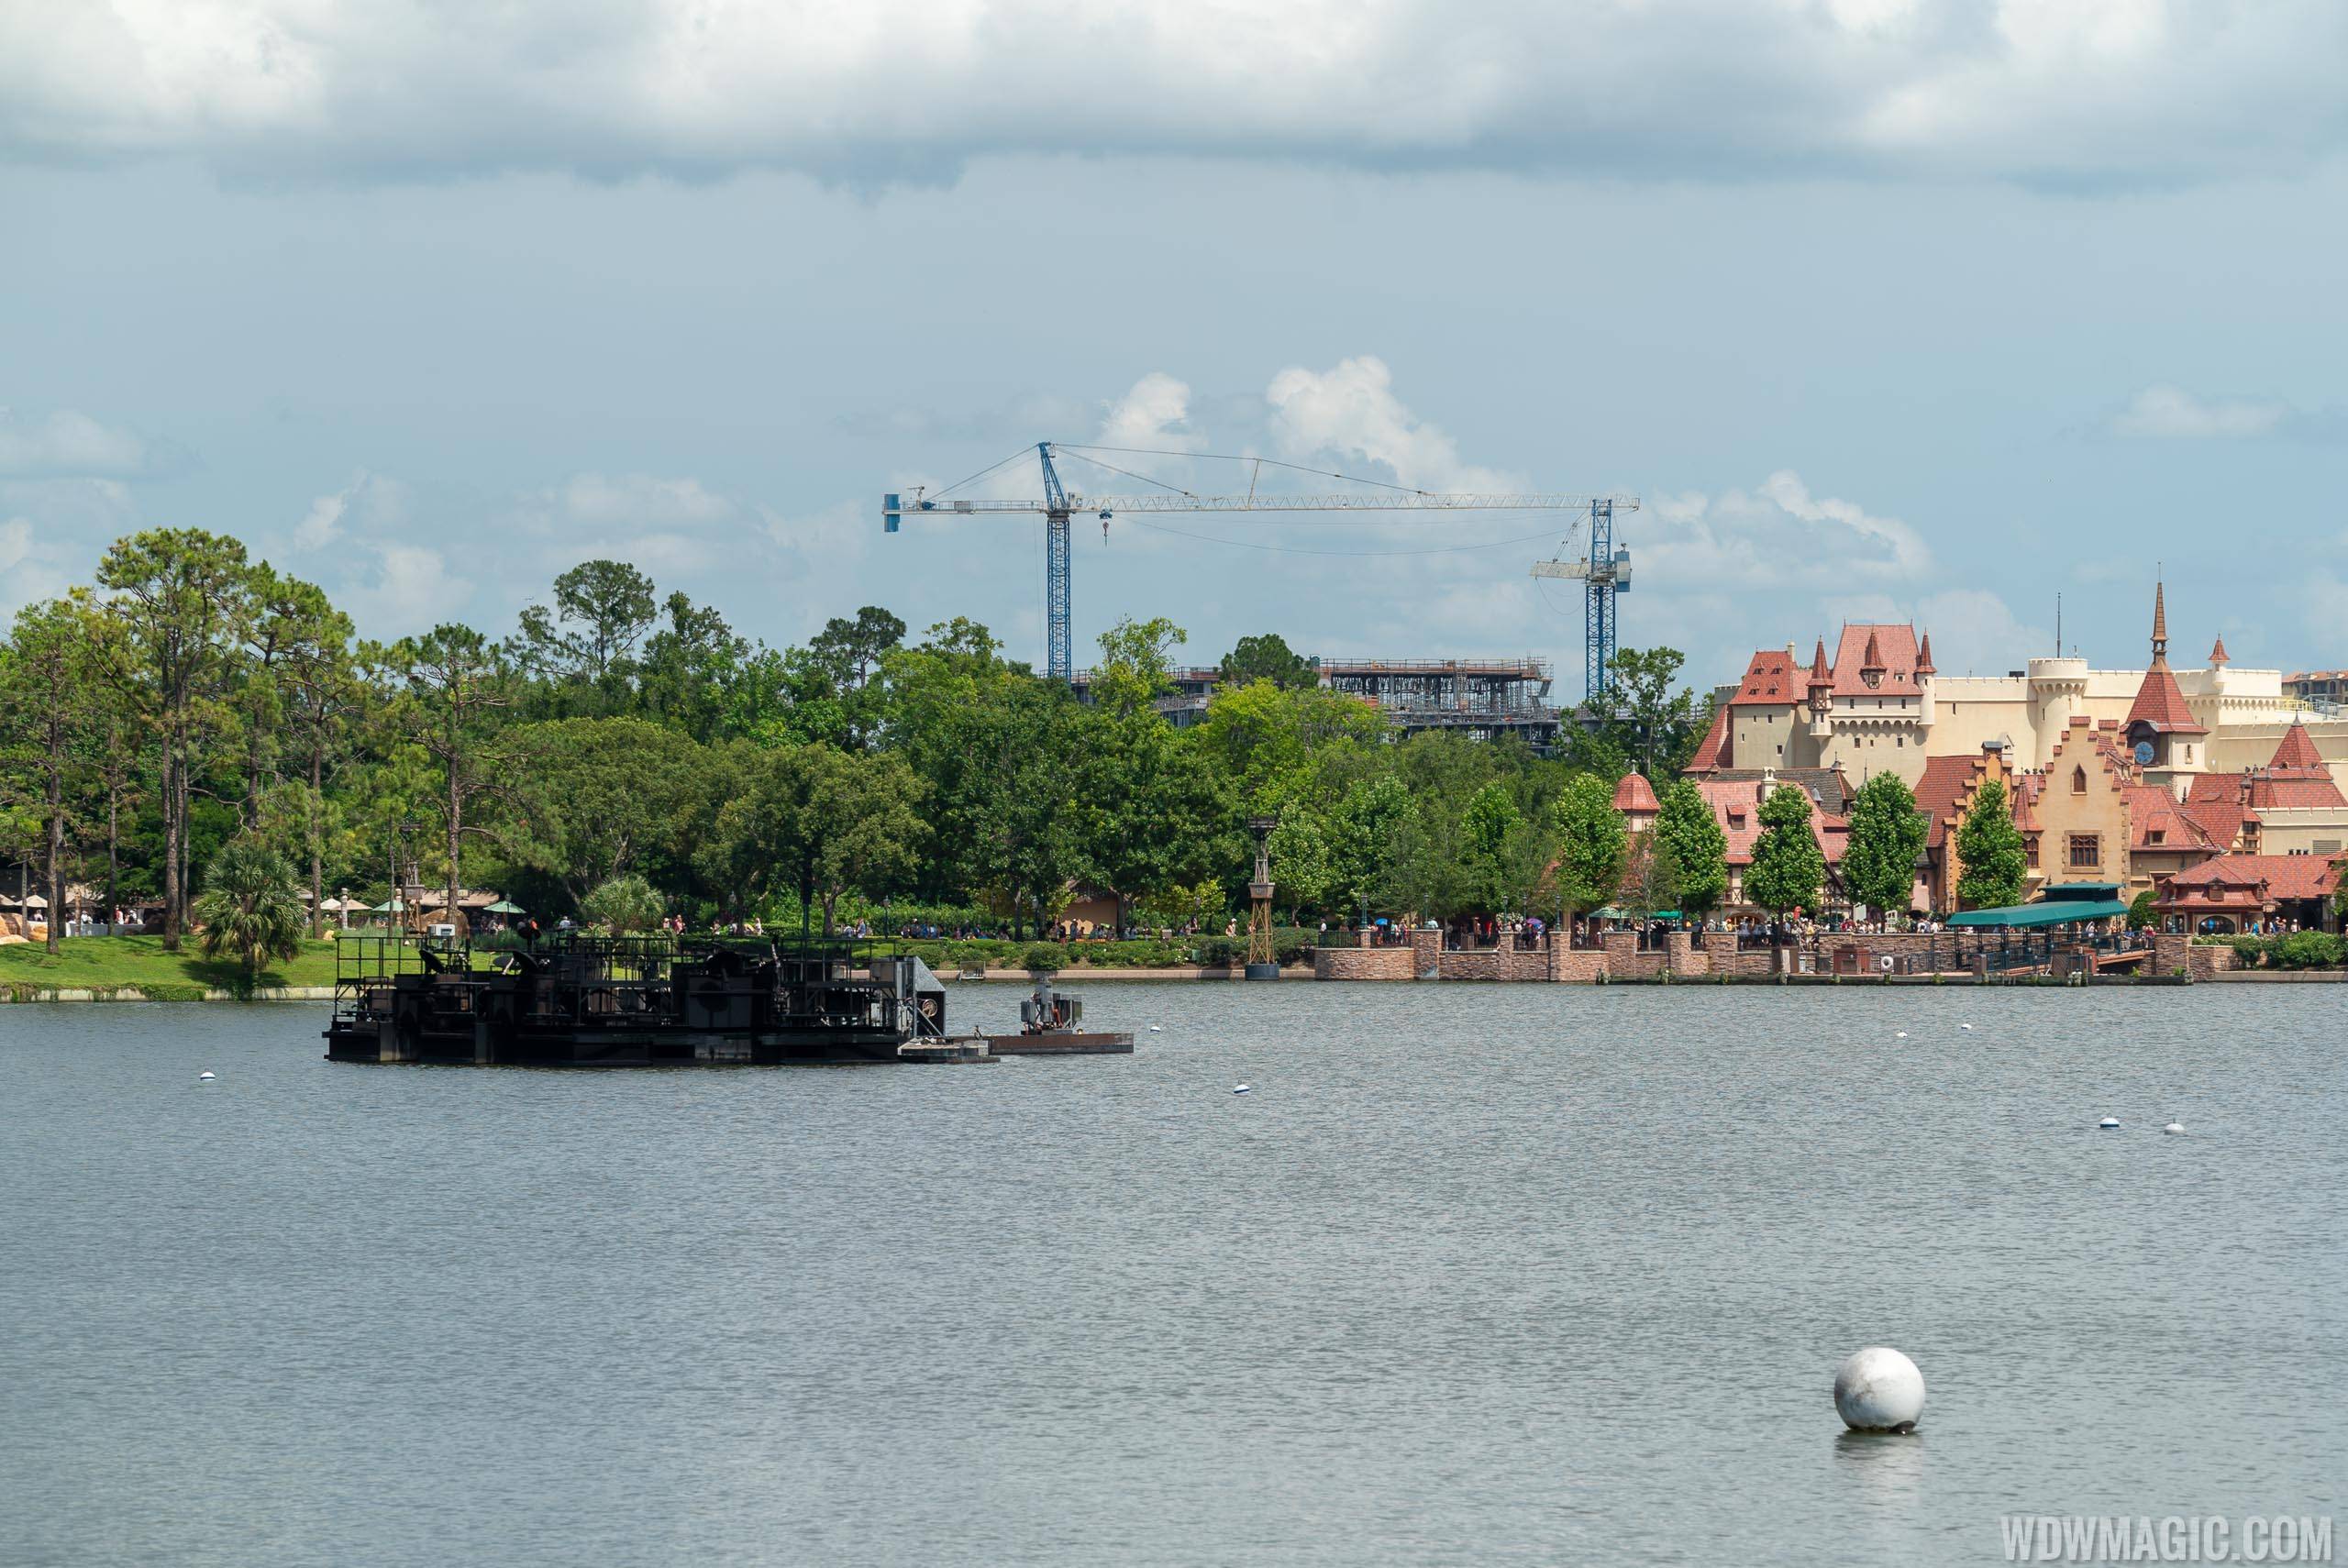 Disney Riviera construction from inside Epcot